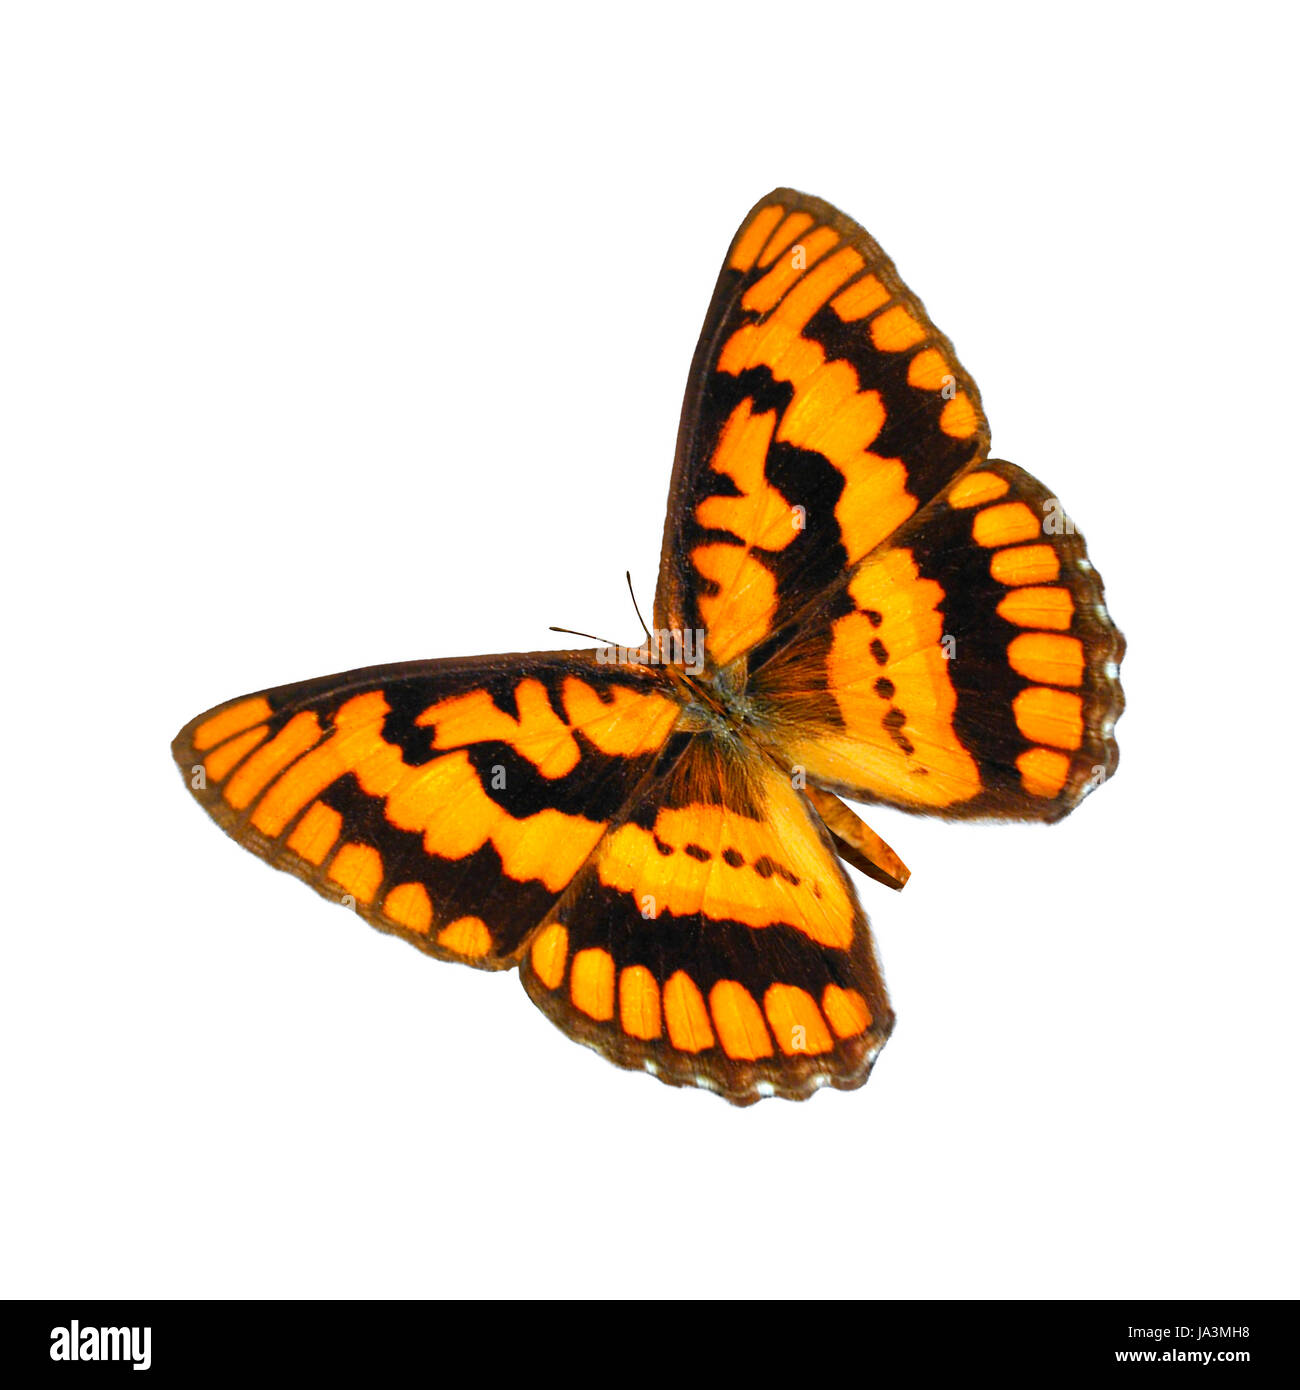 3D digital render of a Chequered Skipper or Arctic Skipper (Carterocephalus palaemon), a butterfly of the Hesperiidae family, isolated on white background Stock Photo